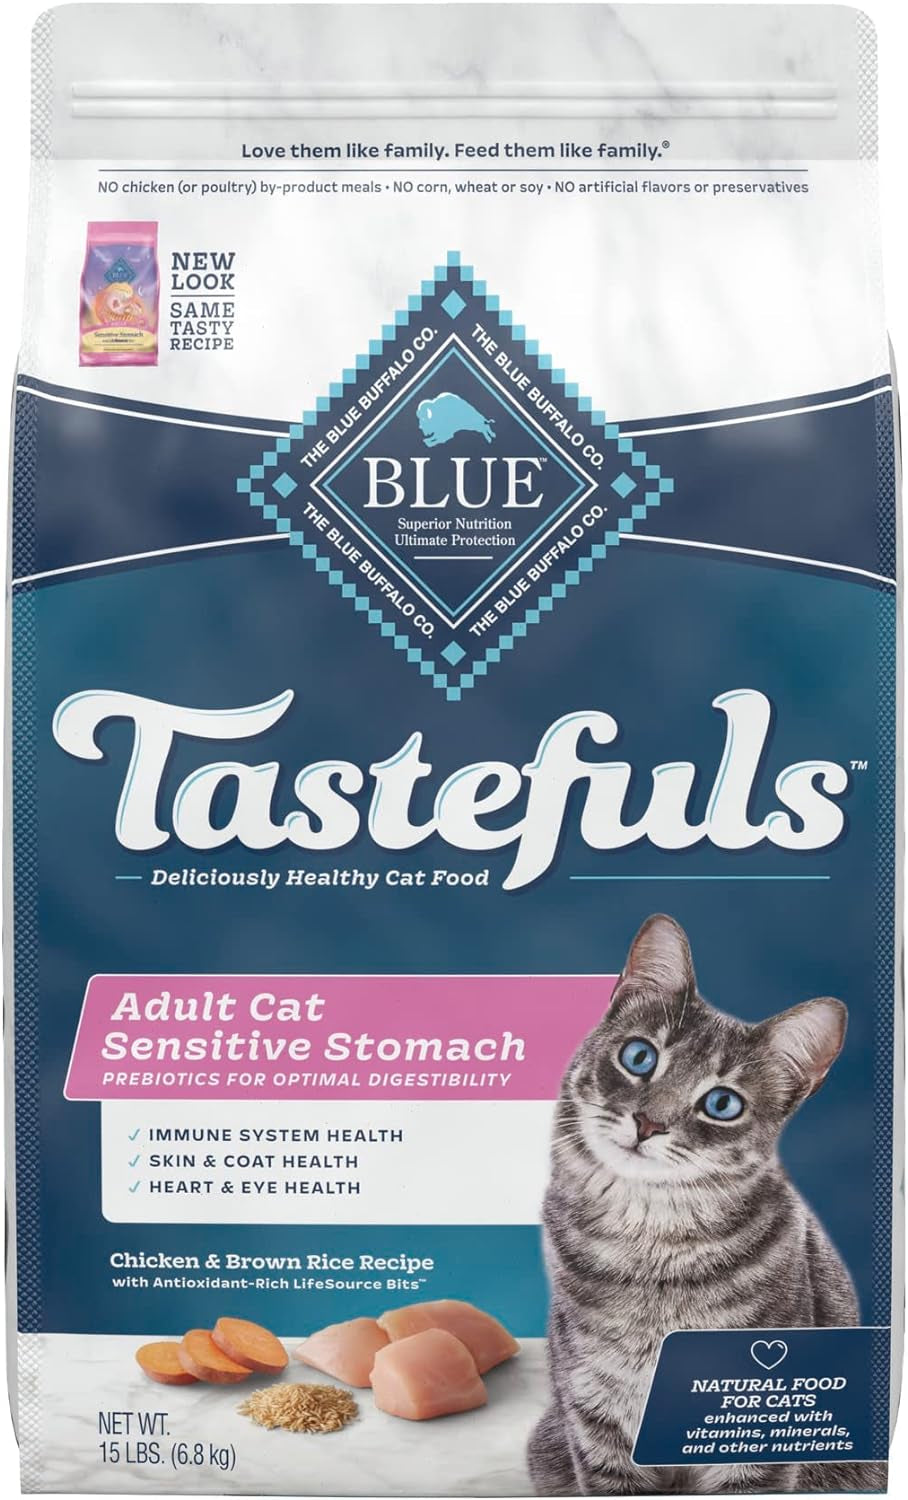 Tastefuls Natural Dry Food for Adult Cats, Sensitive Stomach, Chicken & Brown Rice Recipe, 15-Lb. Bag